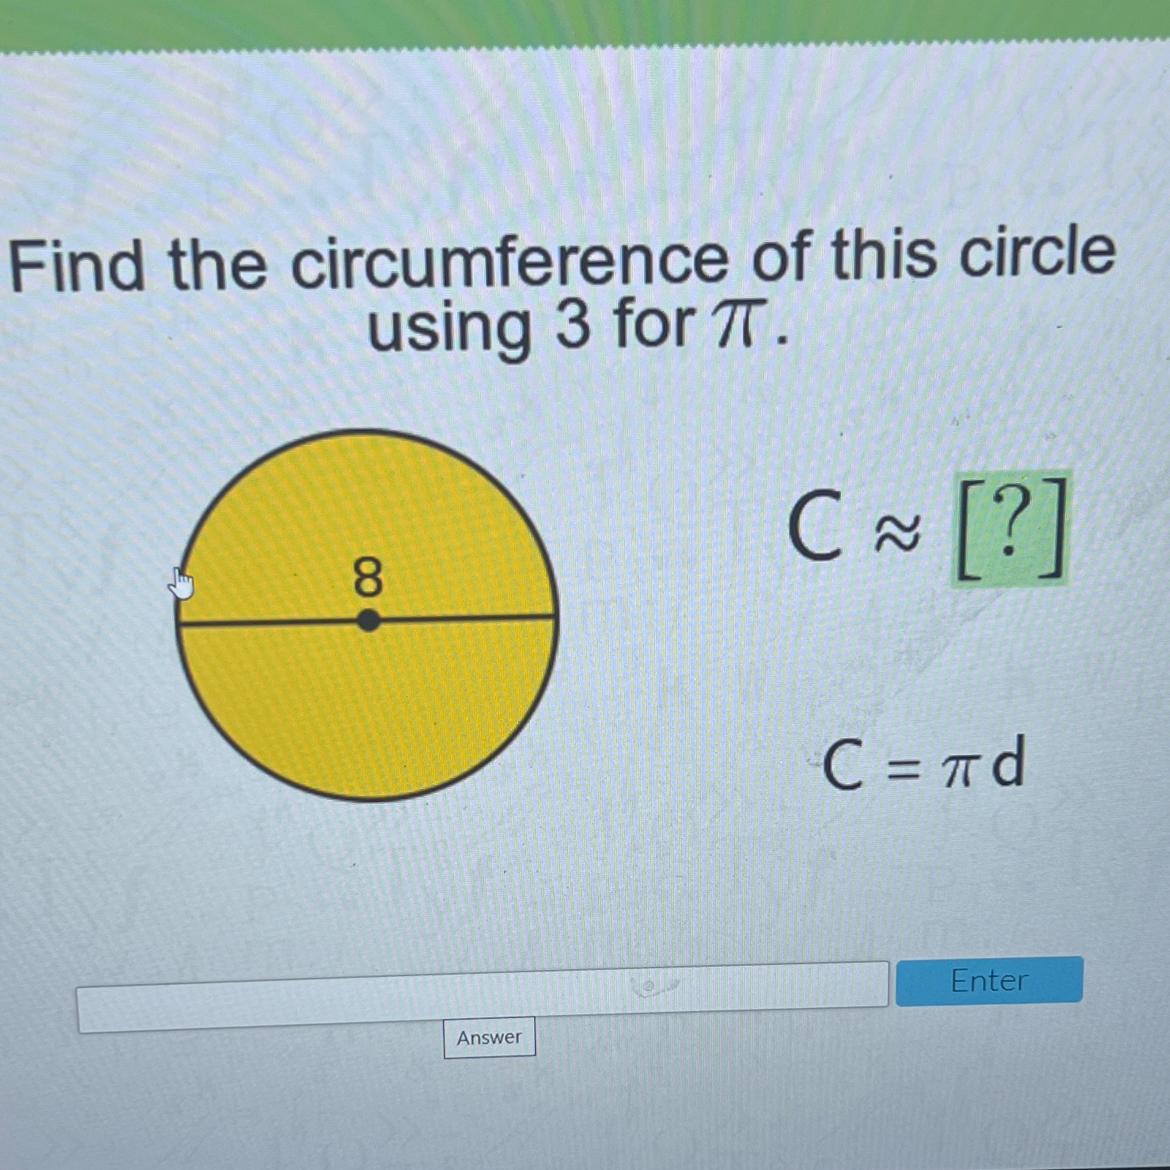 Find The Circumference Of This Circleusing 3 For T.C ~ [?]88C = Id